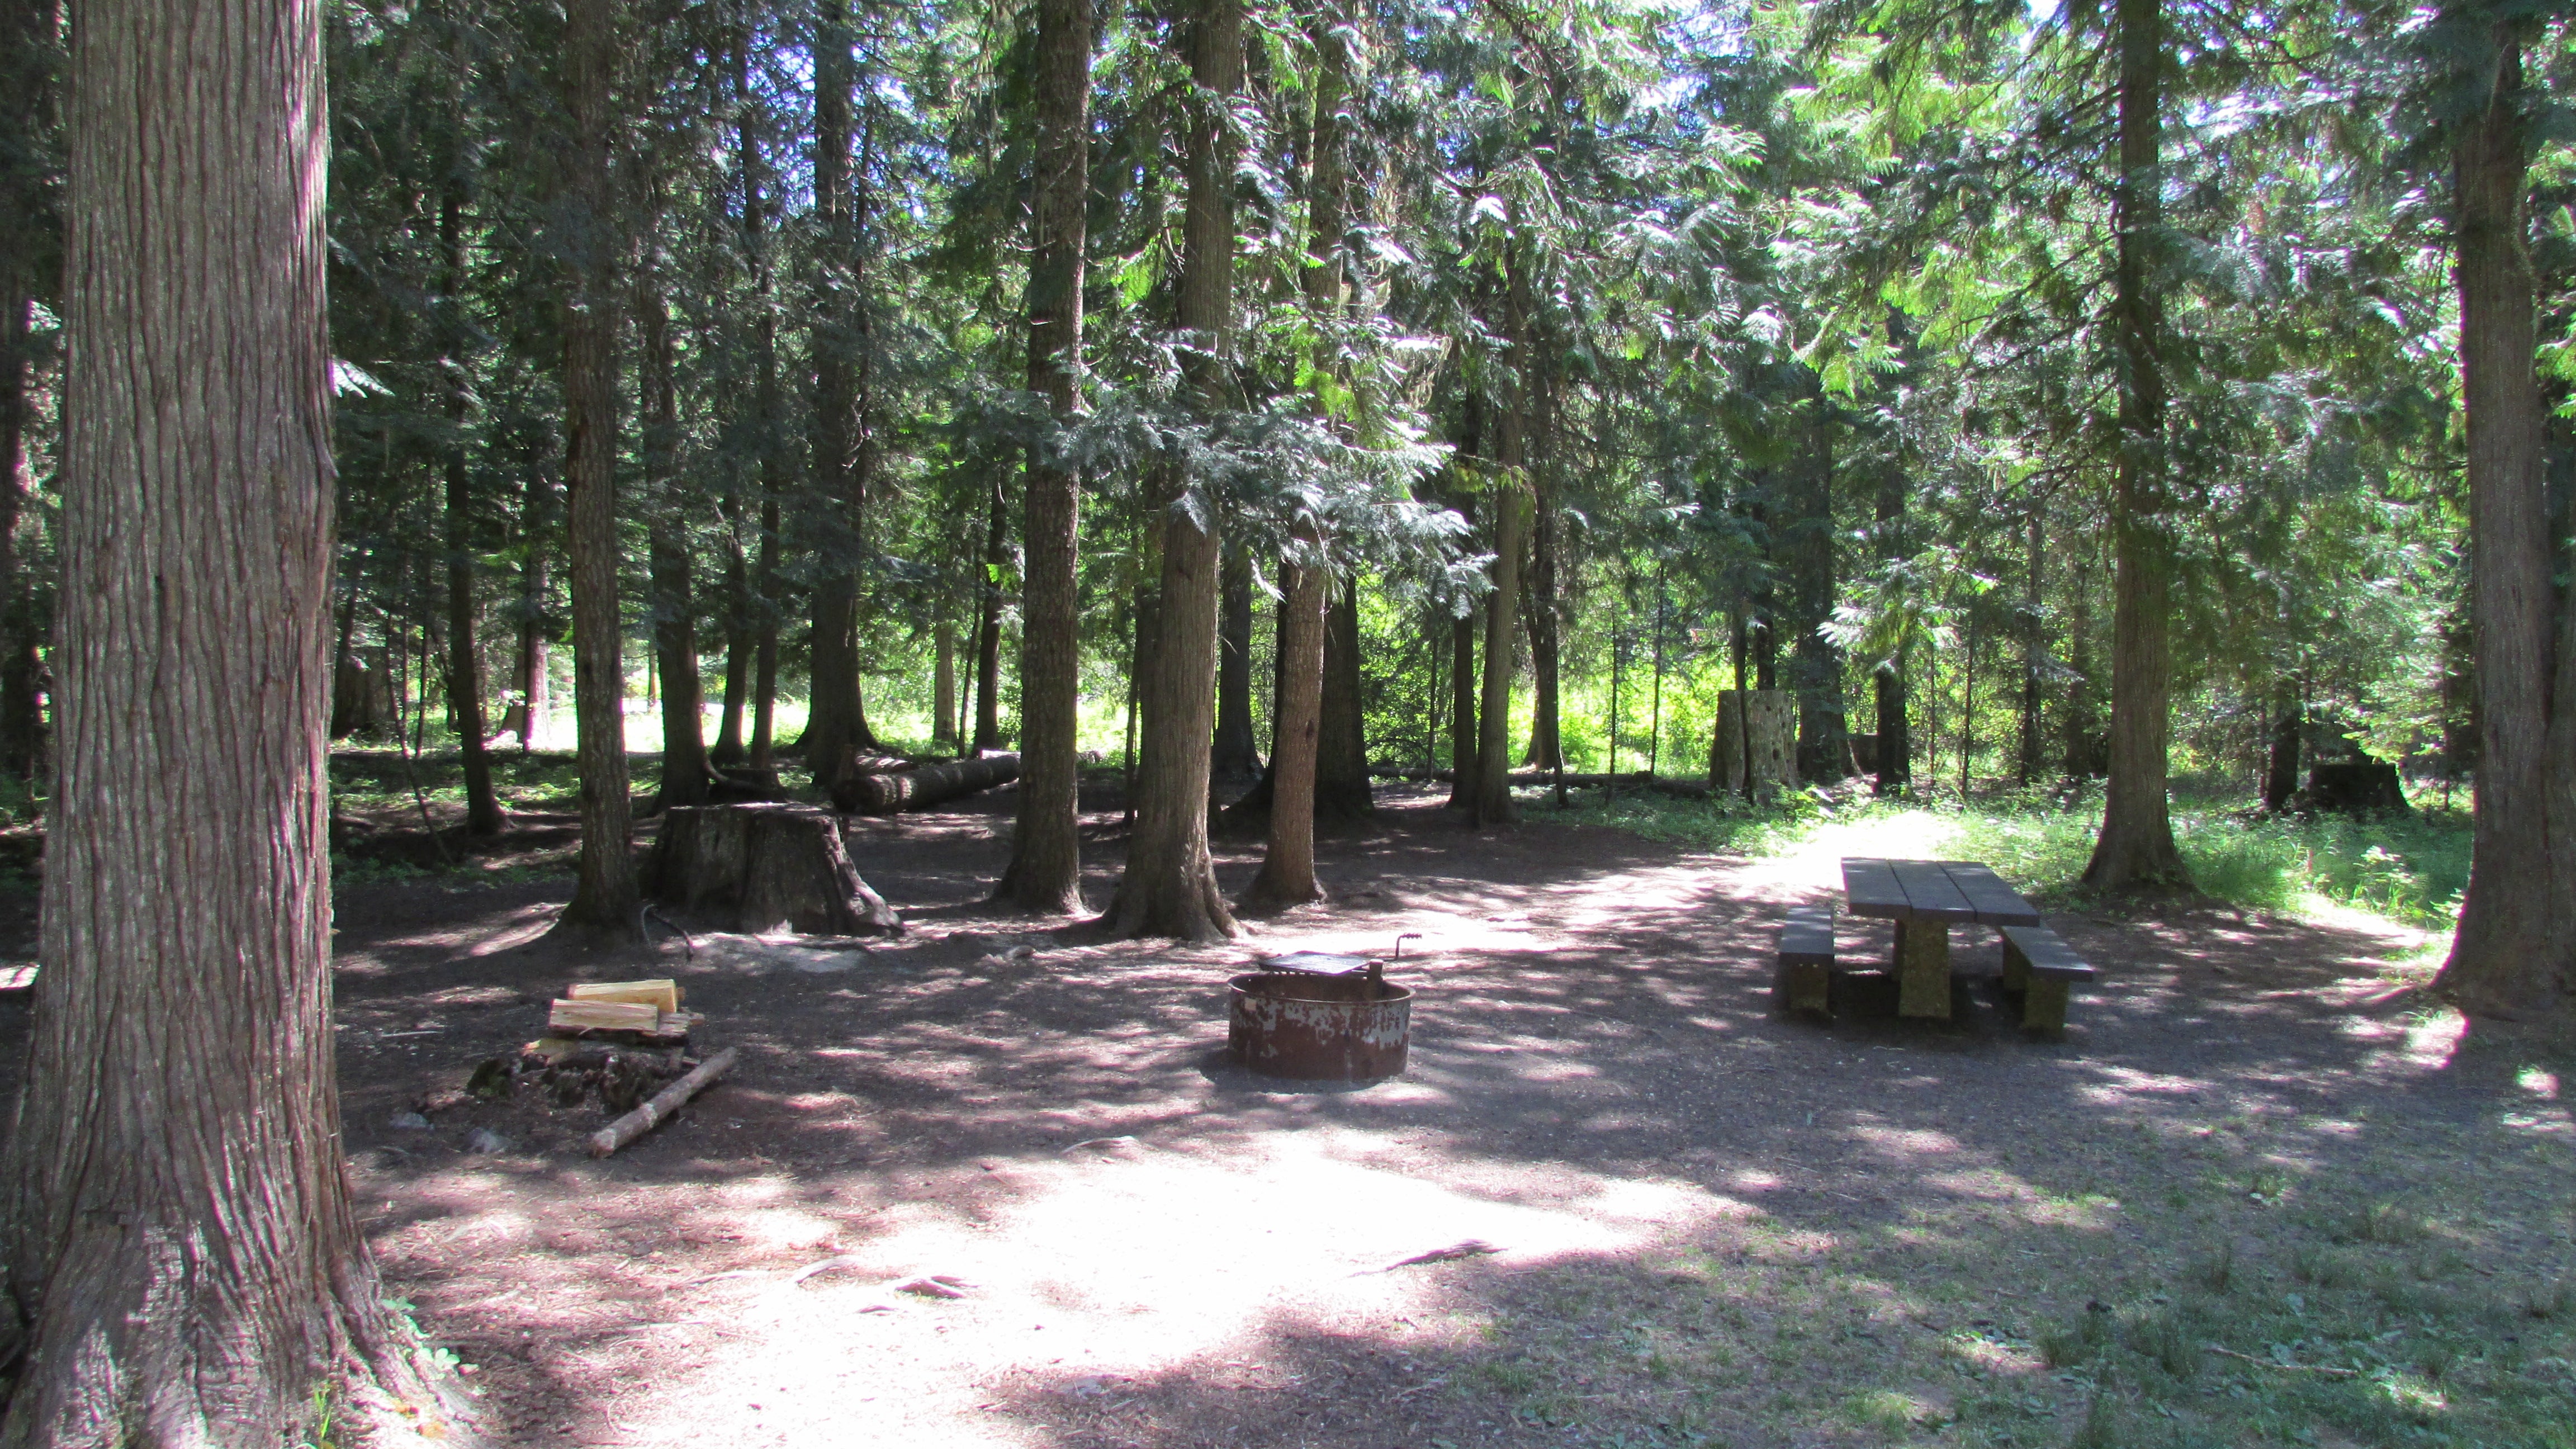 Probably my favorite spot, at the beginning of the east loop. Plenty of space for hammocks, tents, etc and nicely shaded.